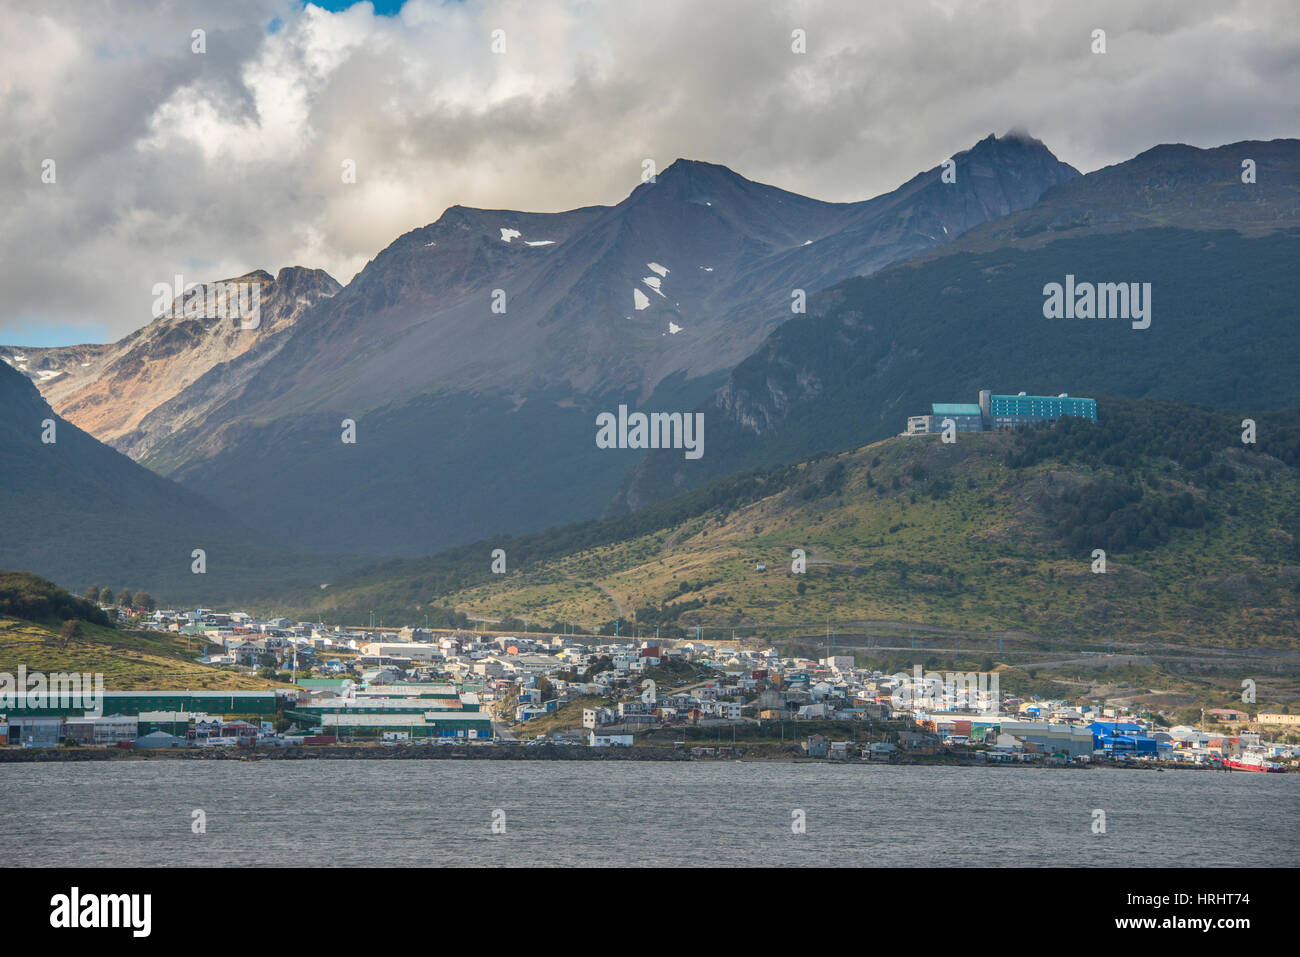 View of Ushuaia, Beagle Channel, Tierra del Fuego, Argentina Stock Photo